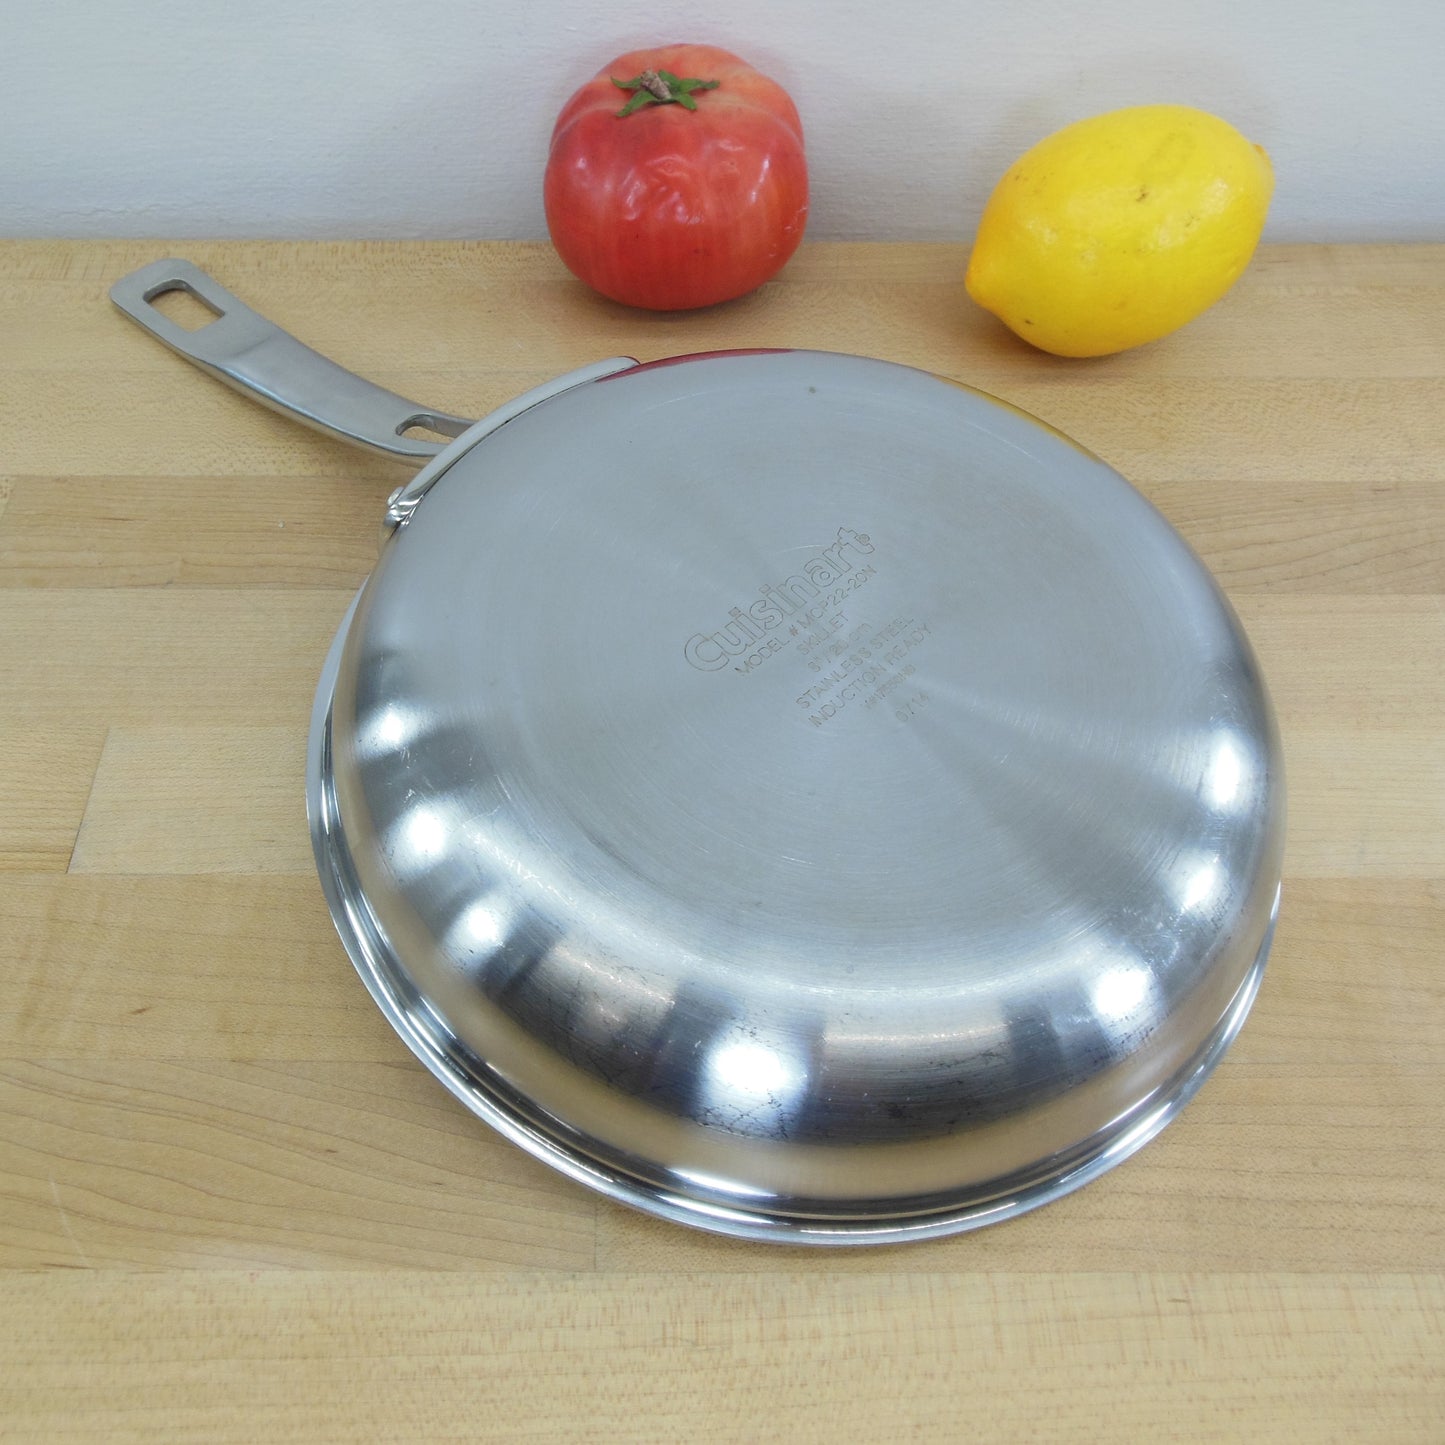 Cuisinart MultiClad Pro Triple Ply Stainless Skillet 8" Used